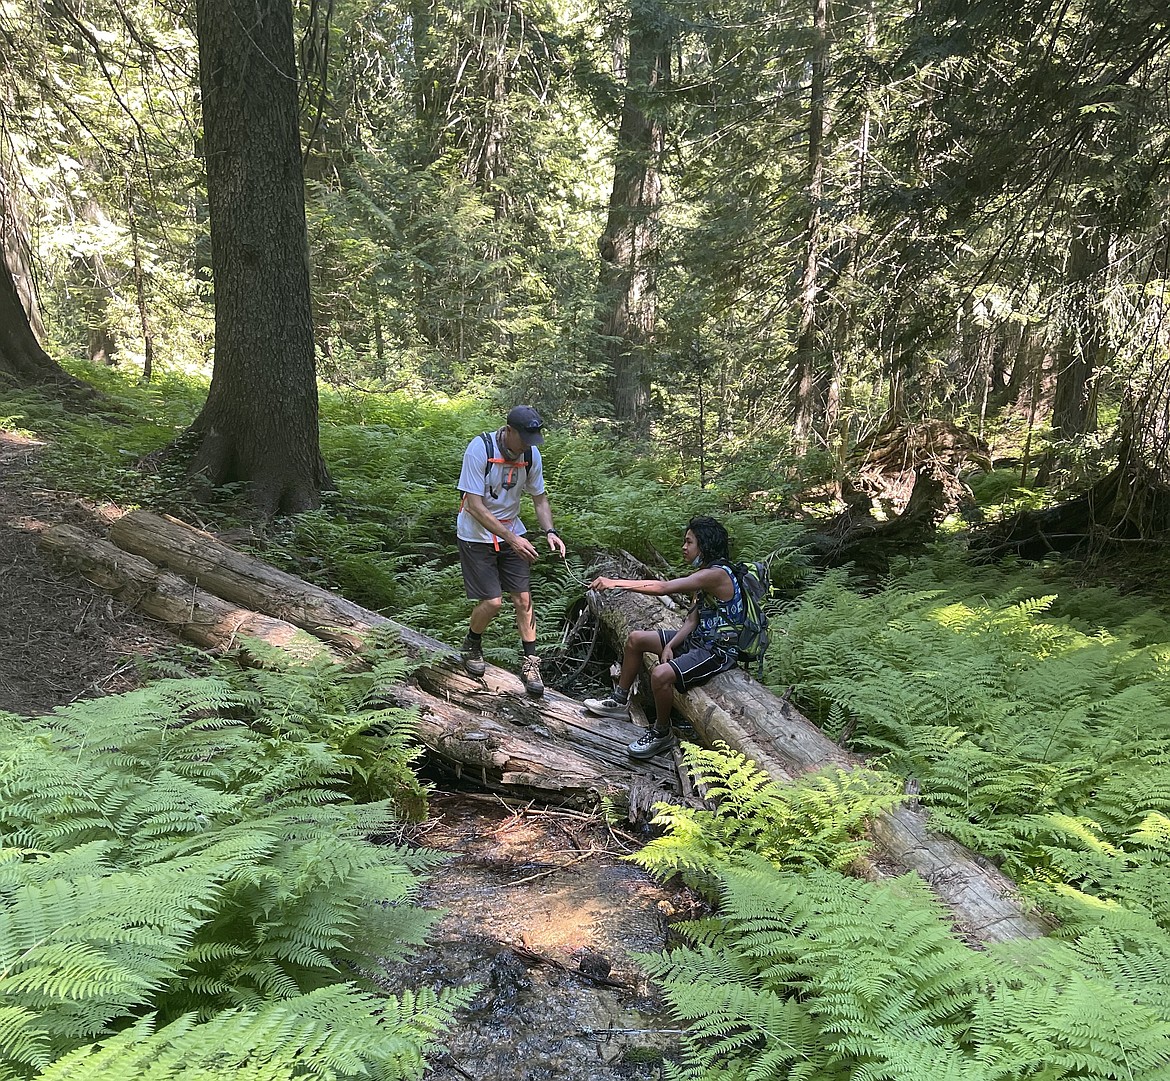 Ben Scofield, Coeur d’Alene Tribe water resources specialist, and Jemari Peone, Climate Explorers intern, take a look at some macroinvertebrates in upper Hobo Creek in the St. Joe National Forest.